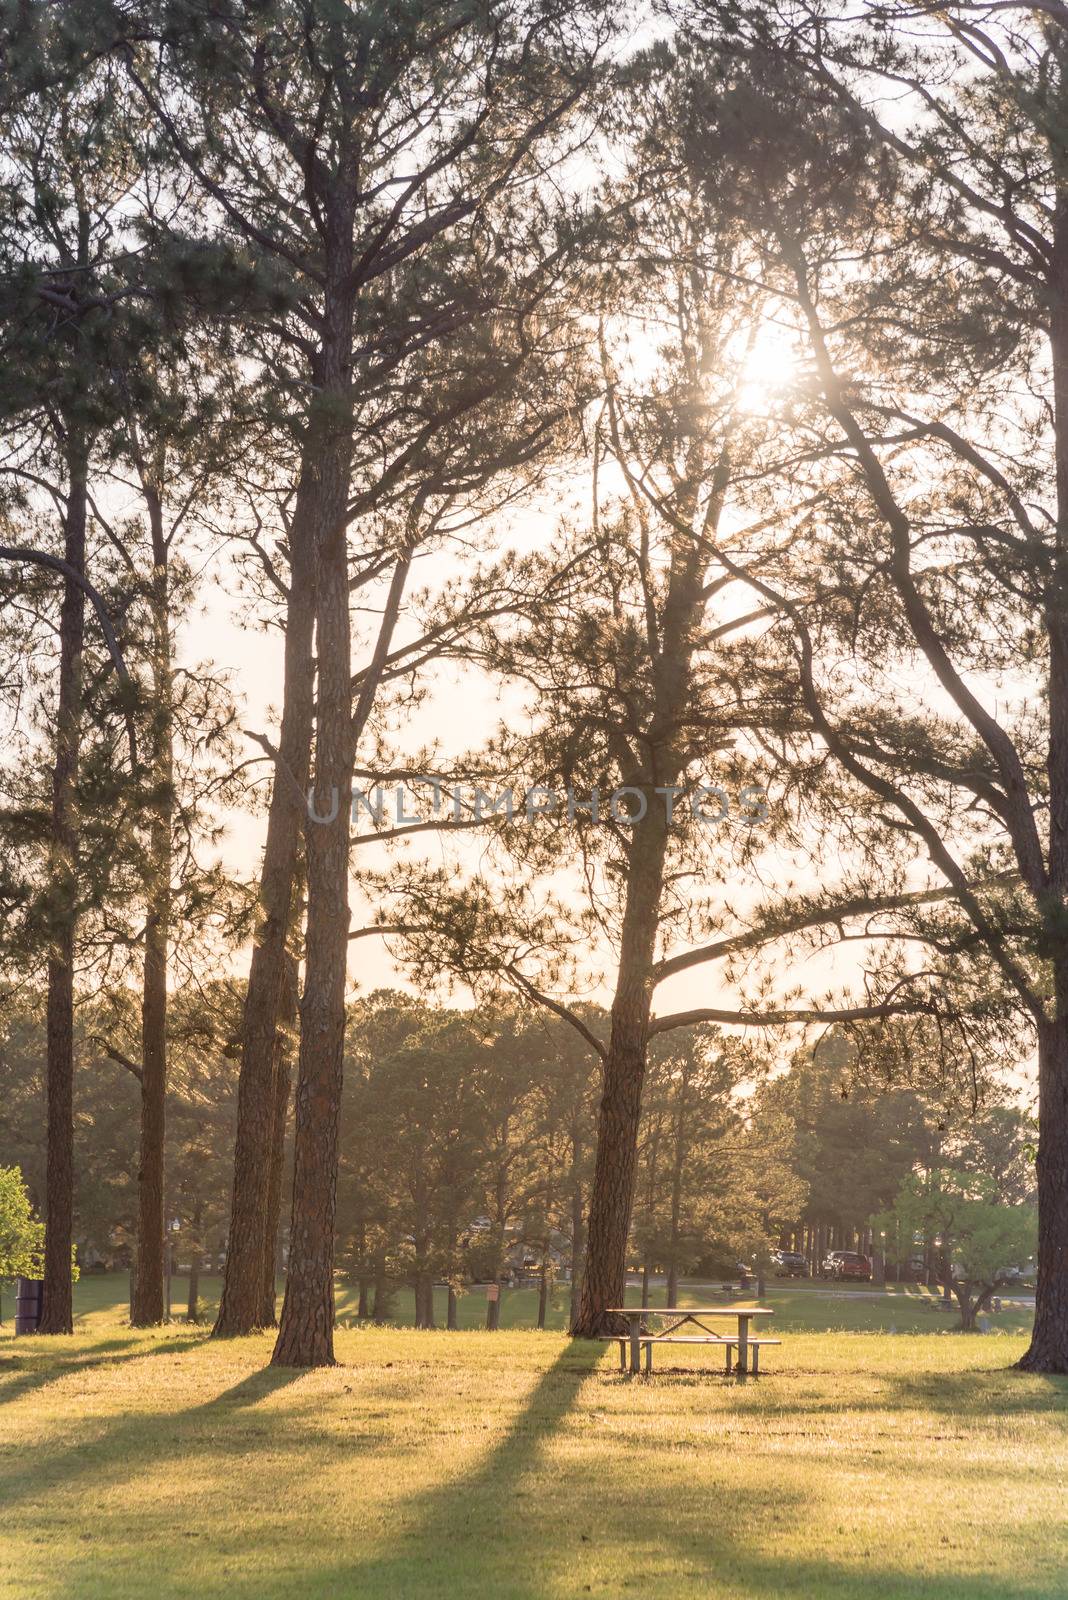 Sun bursting through trees at public park in Texas, America with unoccupied  metal picnic tables and trash cans